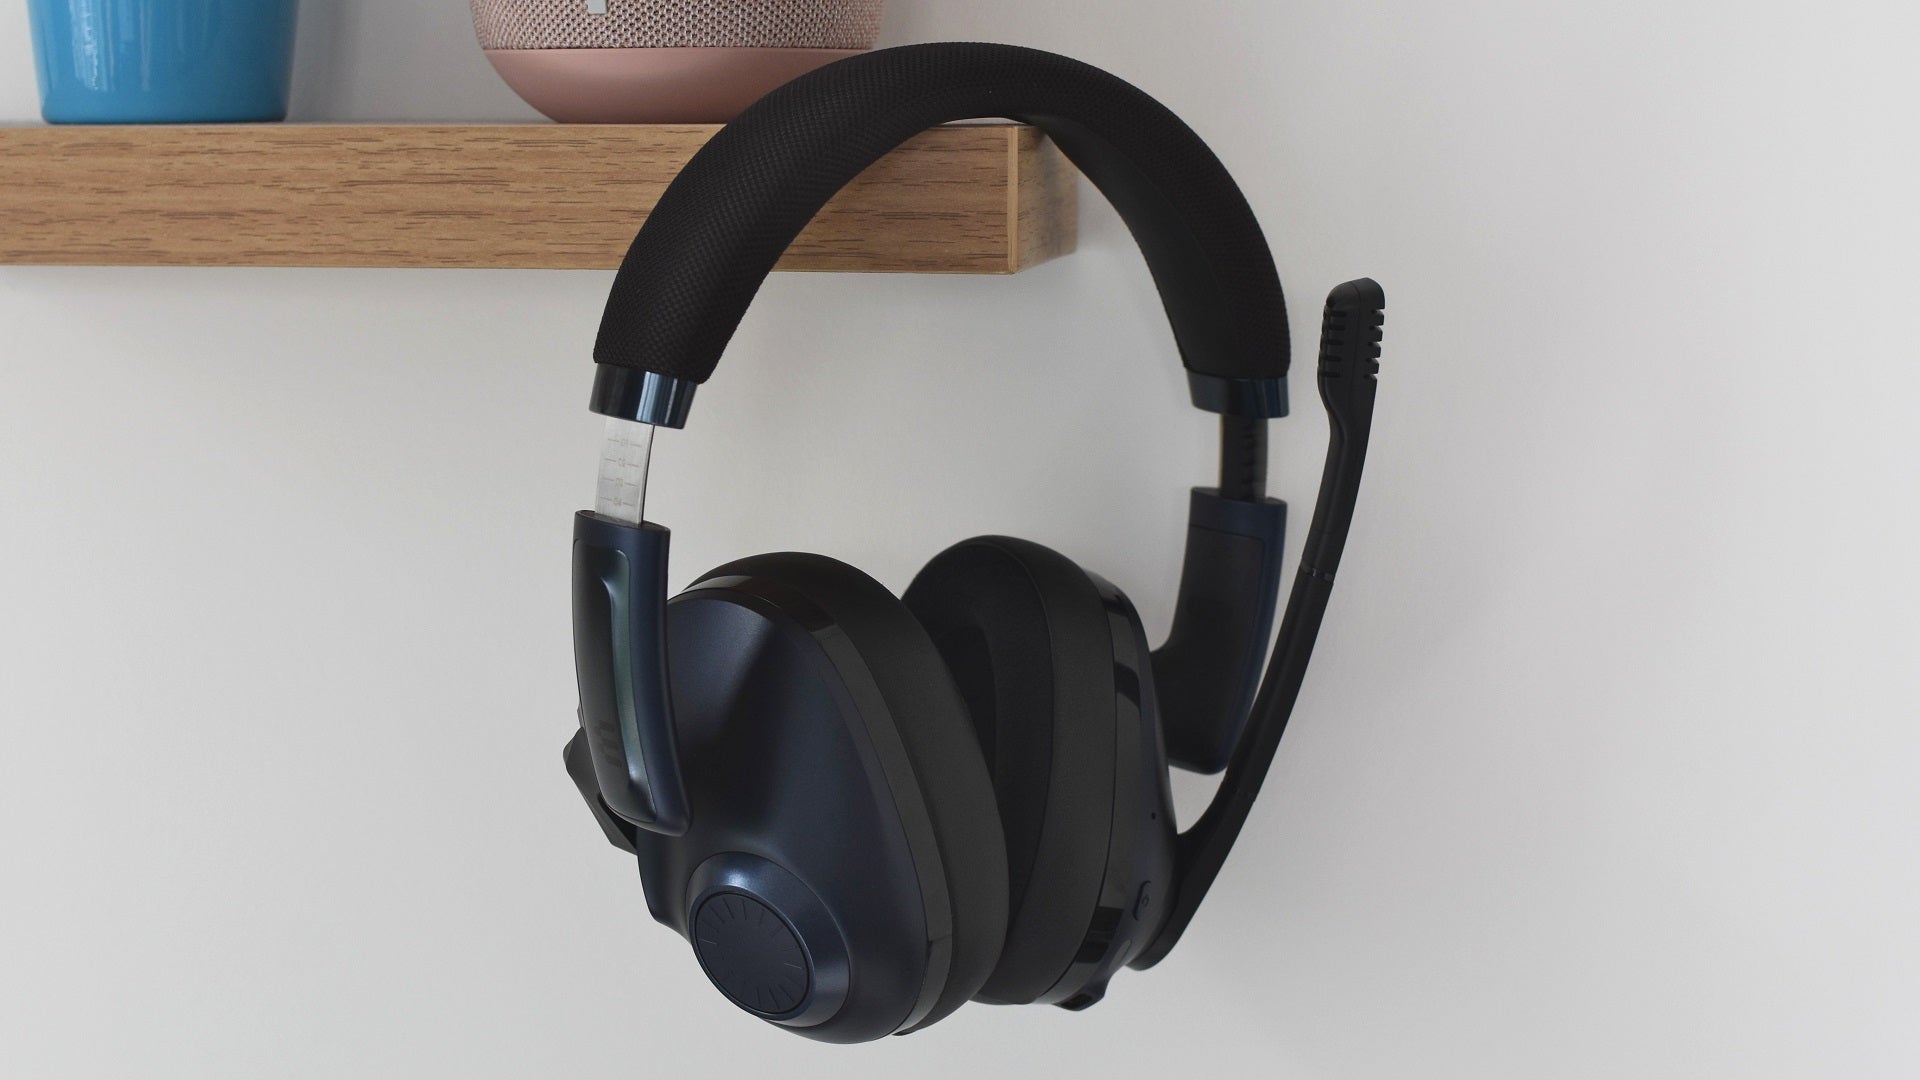 The EPOS H3Pro Hybrid gaming headset hanging from the corner of a shelf.